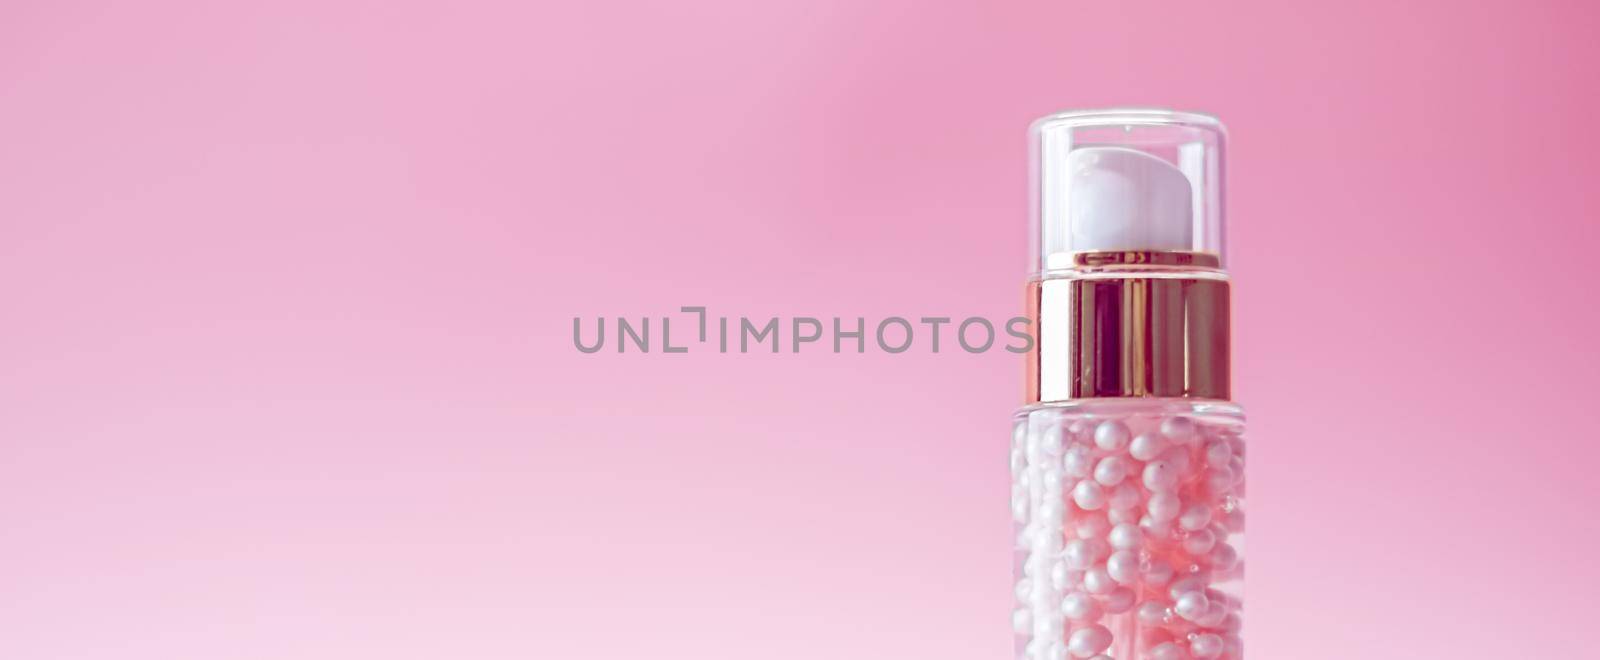 Skincare bottle on pink background, luxury beauty and cosmetic products.